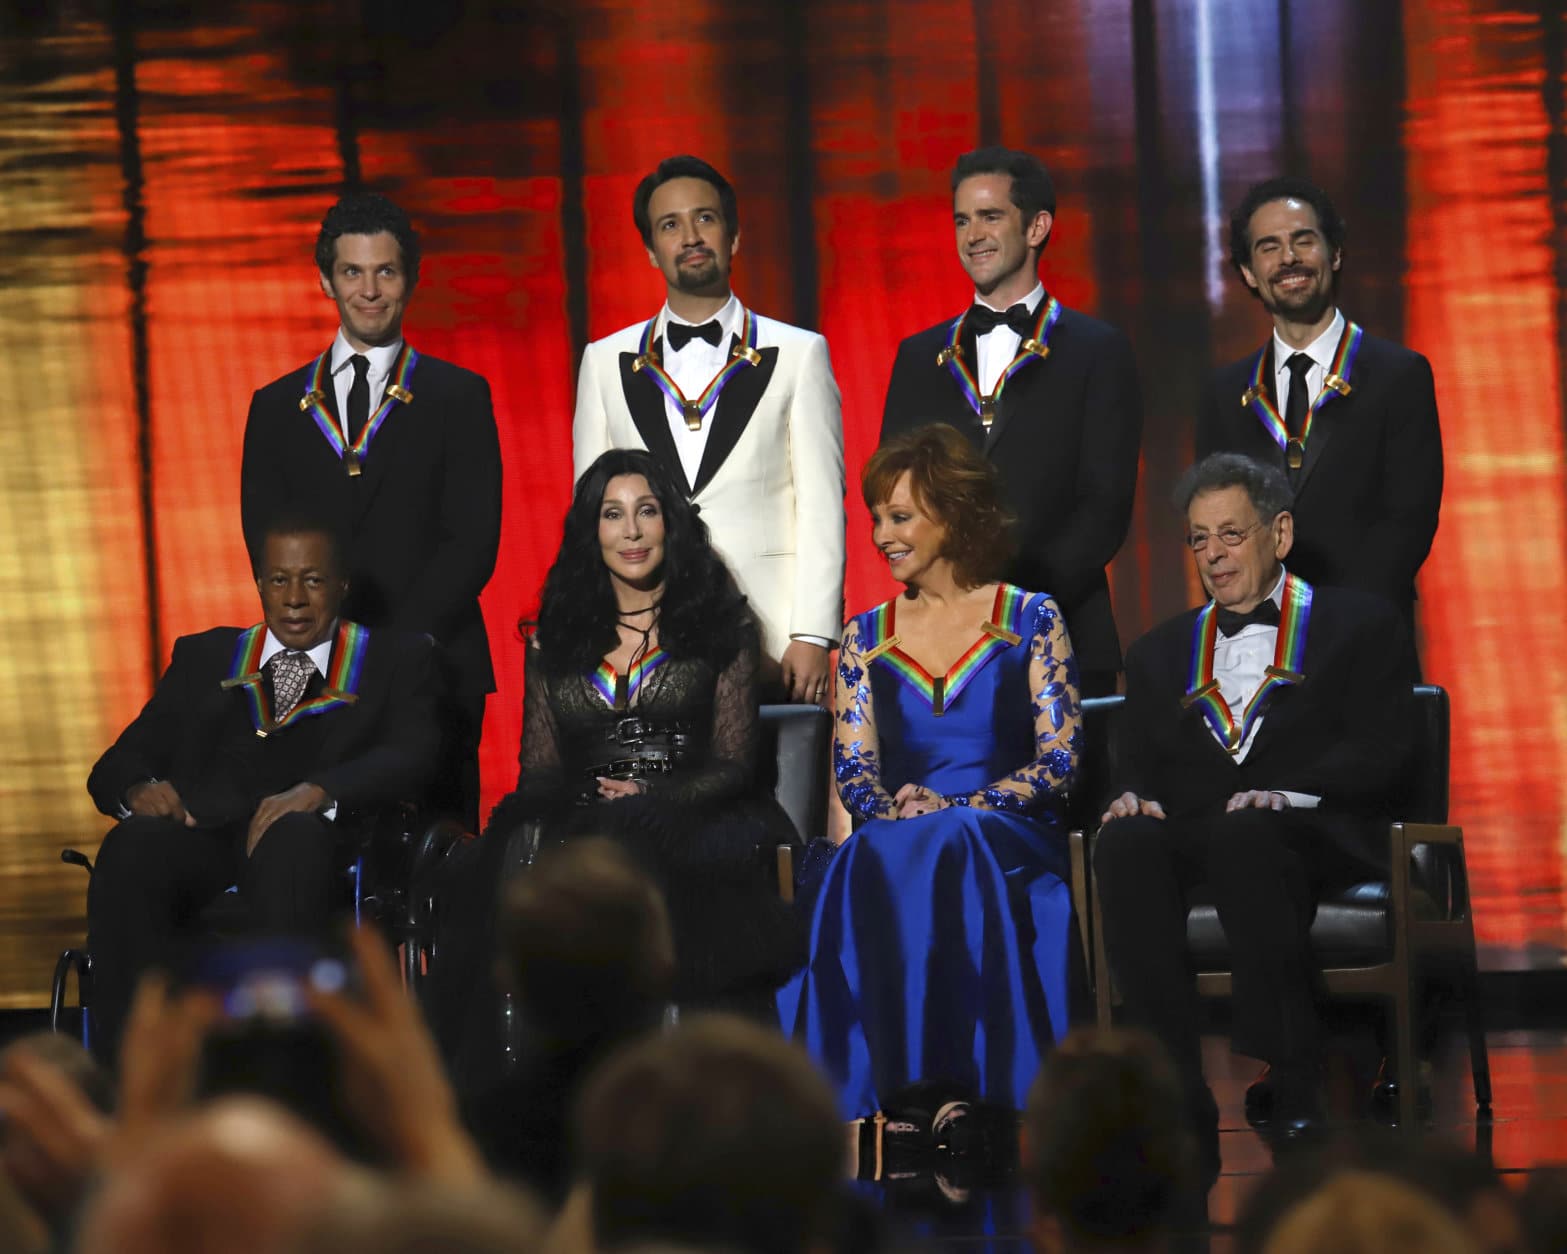 2018 Kennedy Center honorees, front row from left, Wayne Shorter, Cher, Reba McEntire and Philip Glass; and back row from left, the co-creators of "Hamilton," Thomas Kail, Lin-Manuel Miranda, Andy Blankenbuehler and Alex Lacamoire appear on stage during the 41st Annual Kennedy Center Honors at The Kennedy Center, Sunday, Dec. 2, 2018, in Washington. (Photo by Greg Allen/Invision/AP)